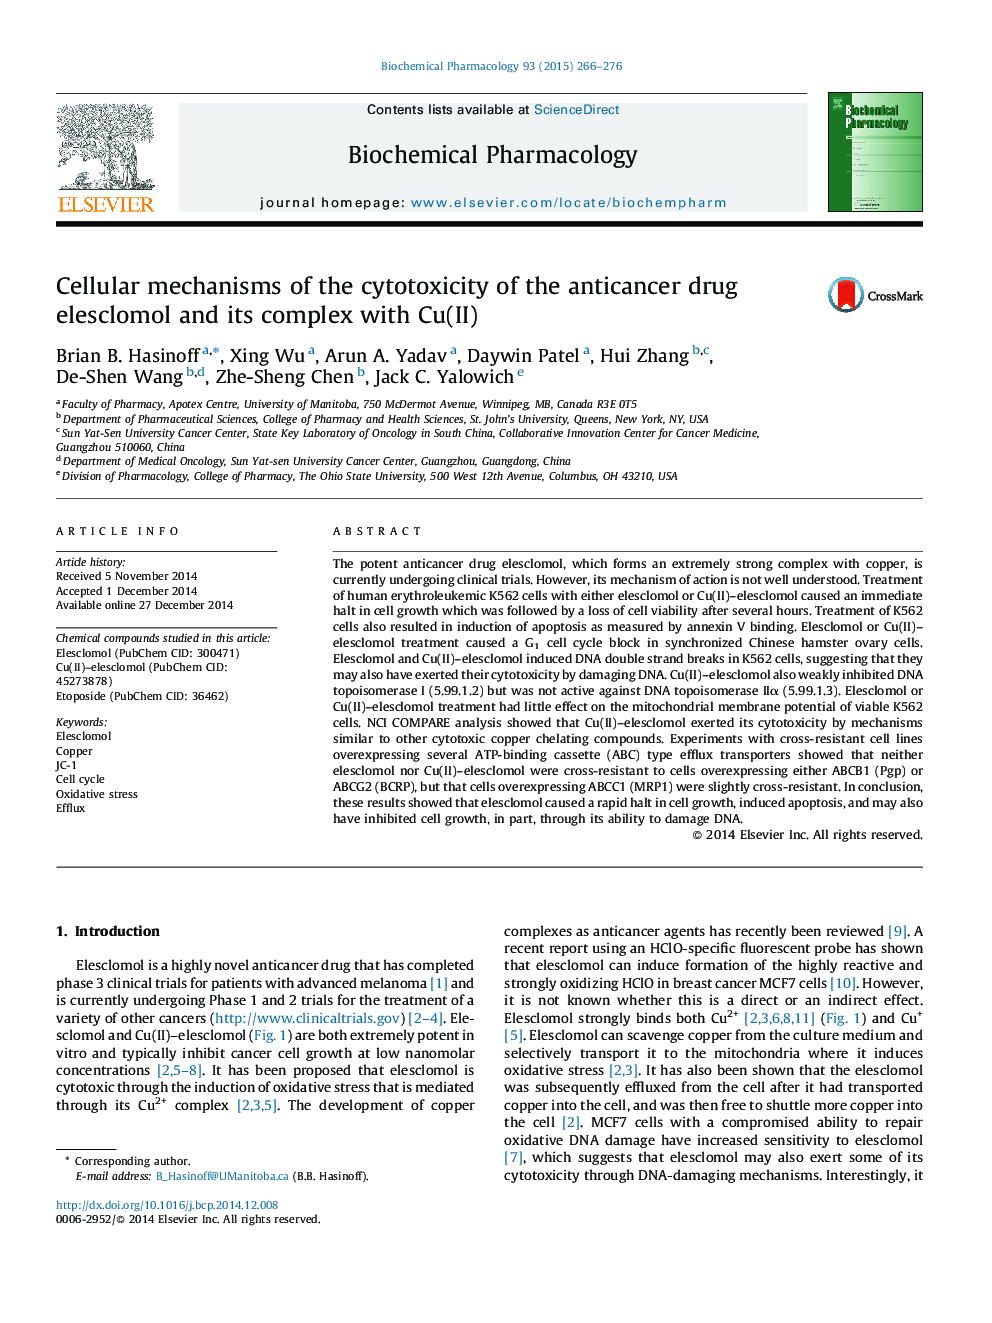 Cellular mechanisms of the cytotoxicity of the anticancer drug elesclomol and its complex with Cu(II)